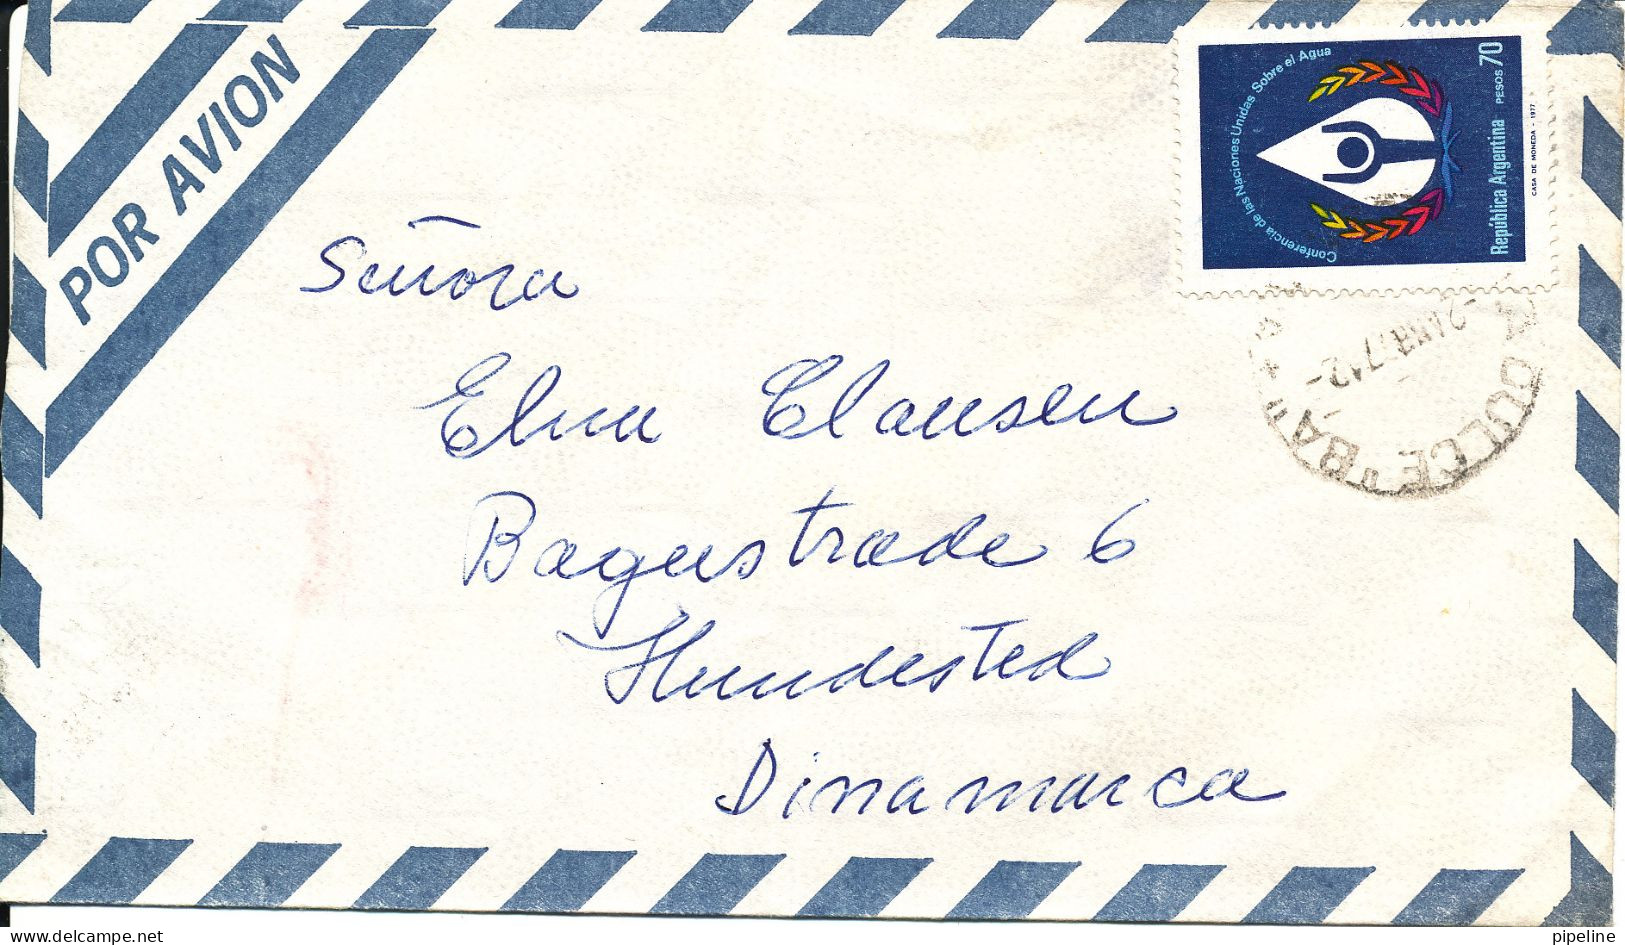 Argentina Air Mail Cover Sent To Denmark 2-4-1977 Single Franked (light Bended Cover) - Posta Aerea